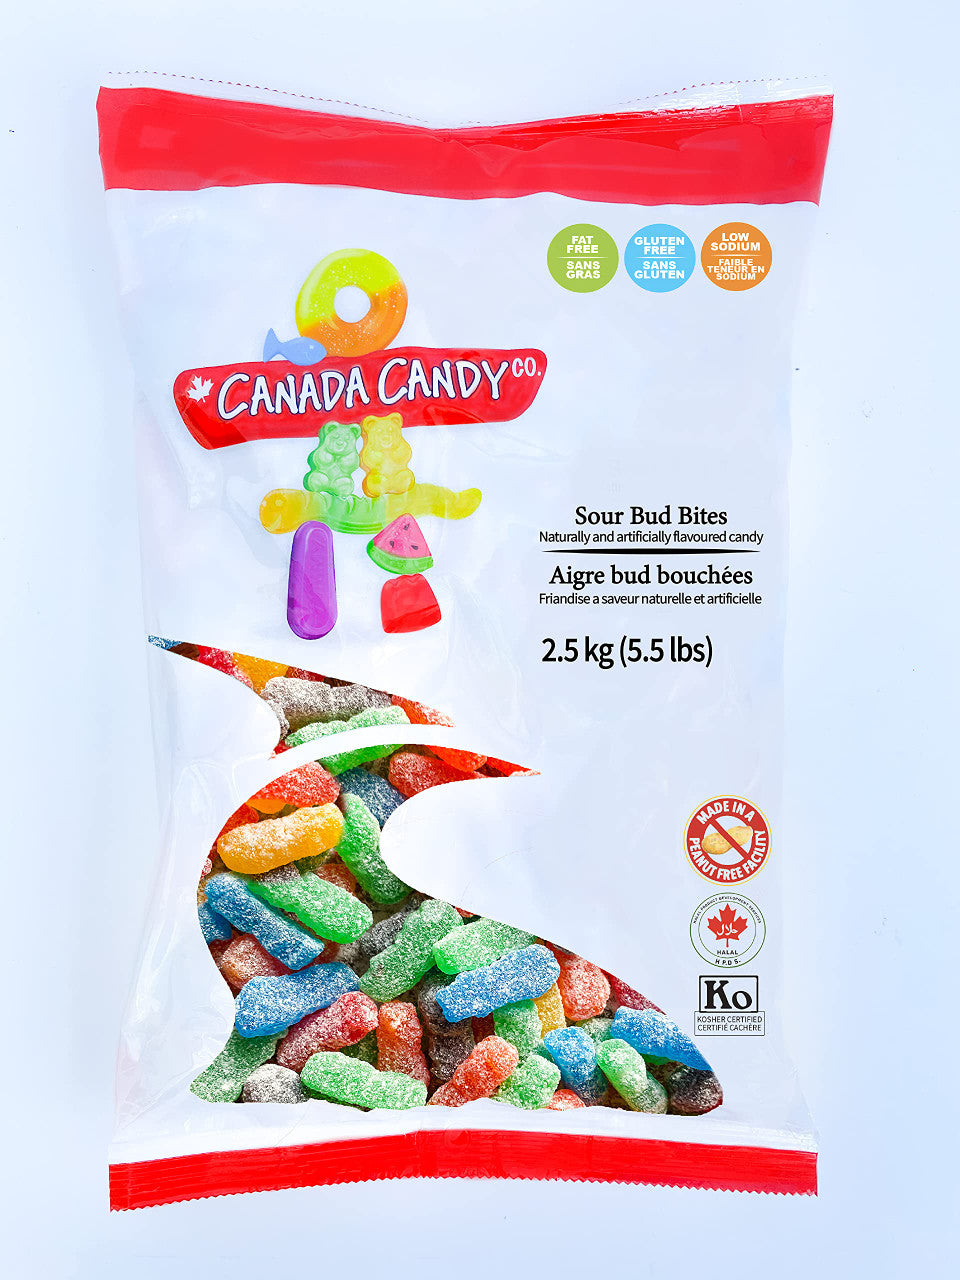 Canada Candy - Sour Bud Bites Gummy Candy, 2.5 kg (5.5 lbs) {Imported from Canada}